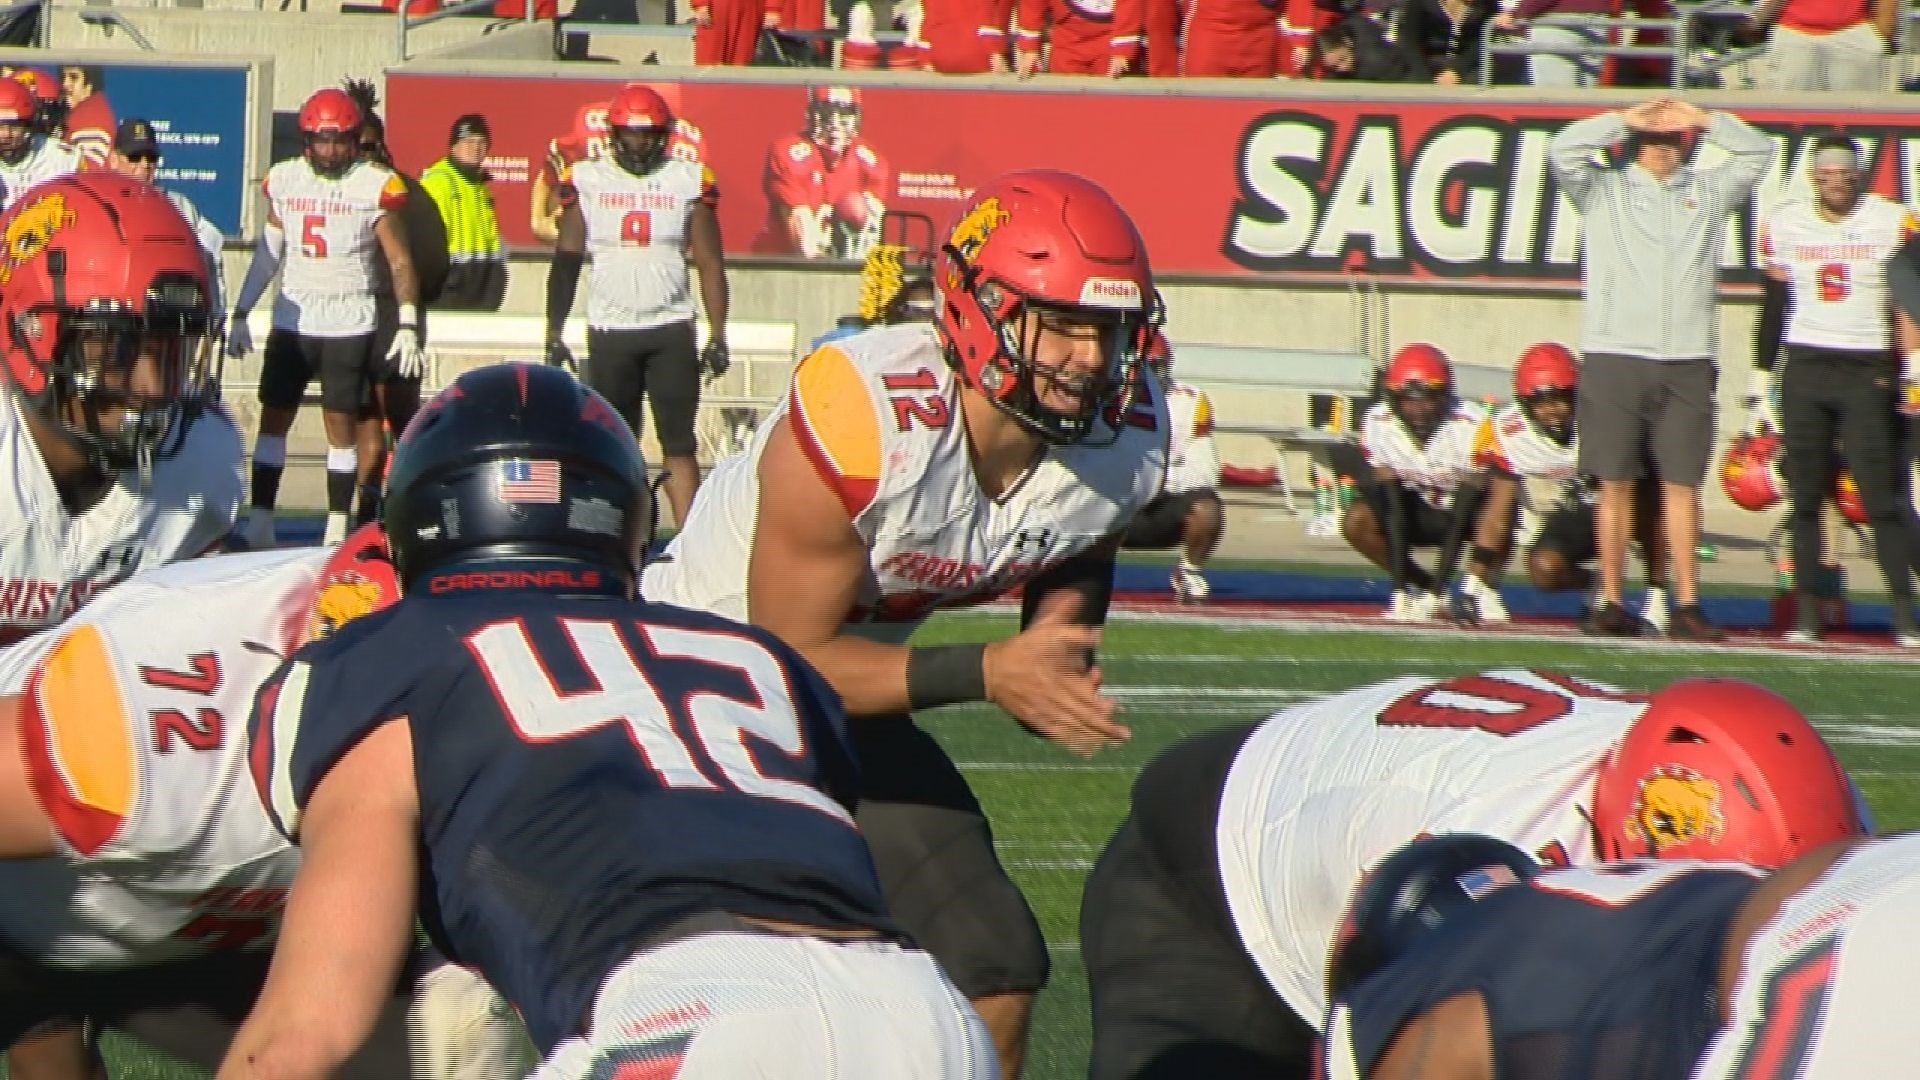 The nation's top-ranked Ferris State University Bulldogs overcame adversity on the road Saturday.